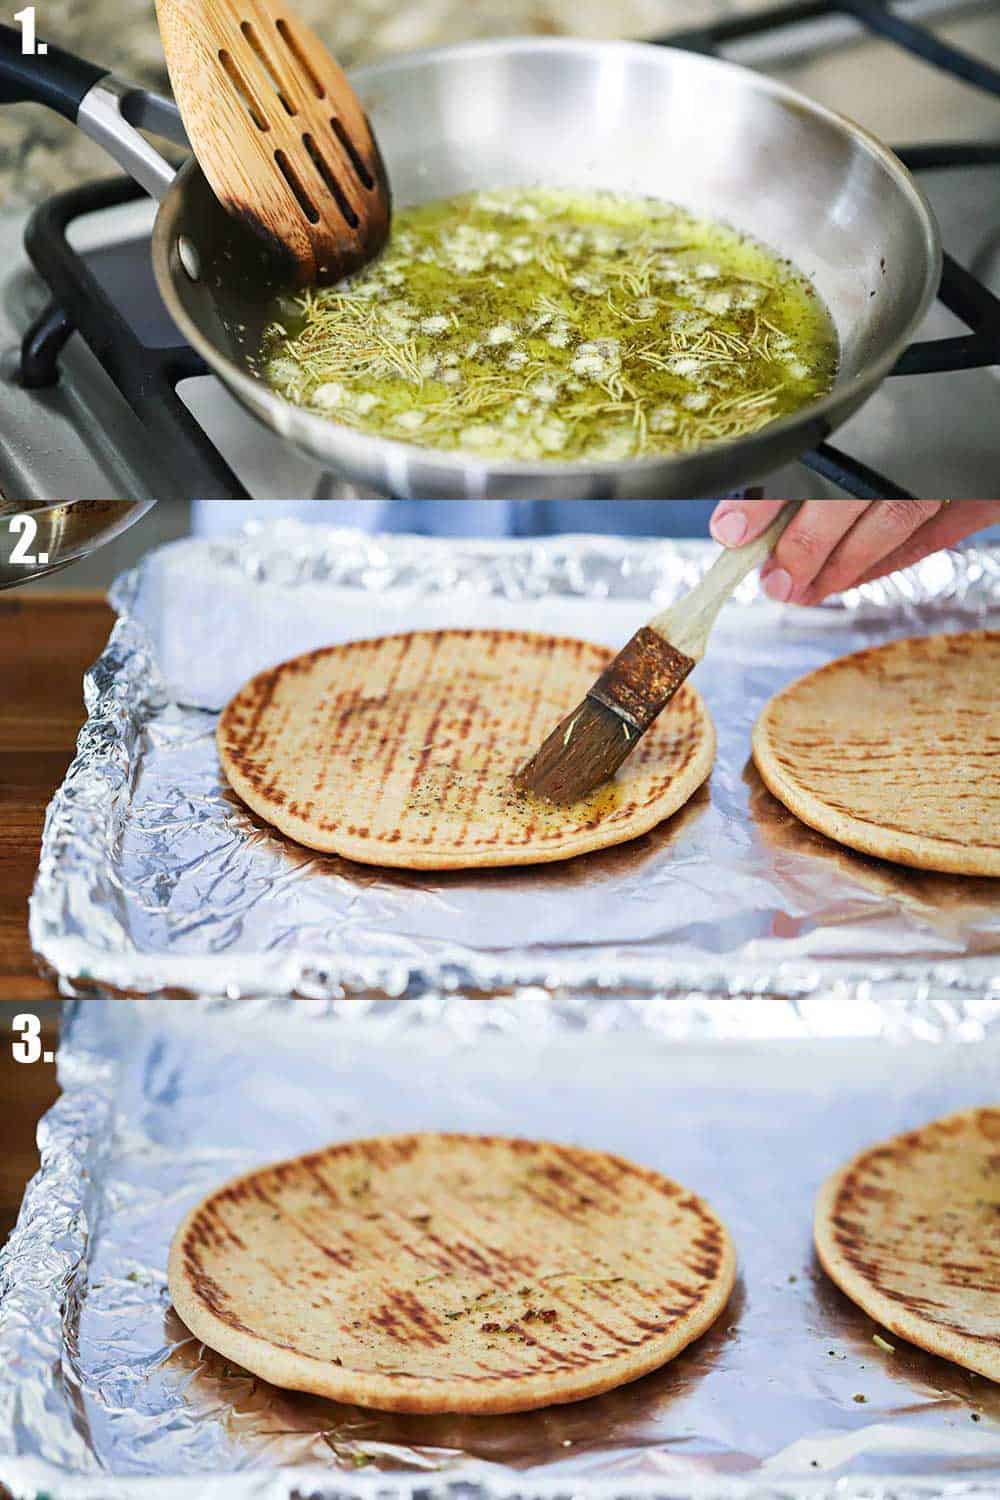 3 stacked images with the top being a small skillet filled with oil, minced garlic, and dried herbs with a wooden spoon stirring it, the 2nd are two pitas on a foil-lined baking sheet being brushed with oil, the 3rd the same two pitas after they have been heated in the oven.